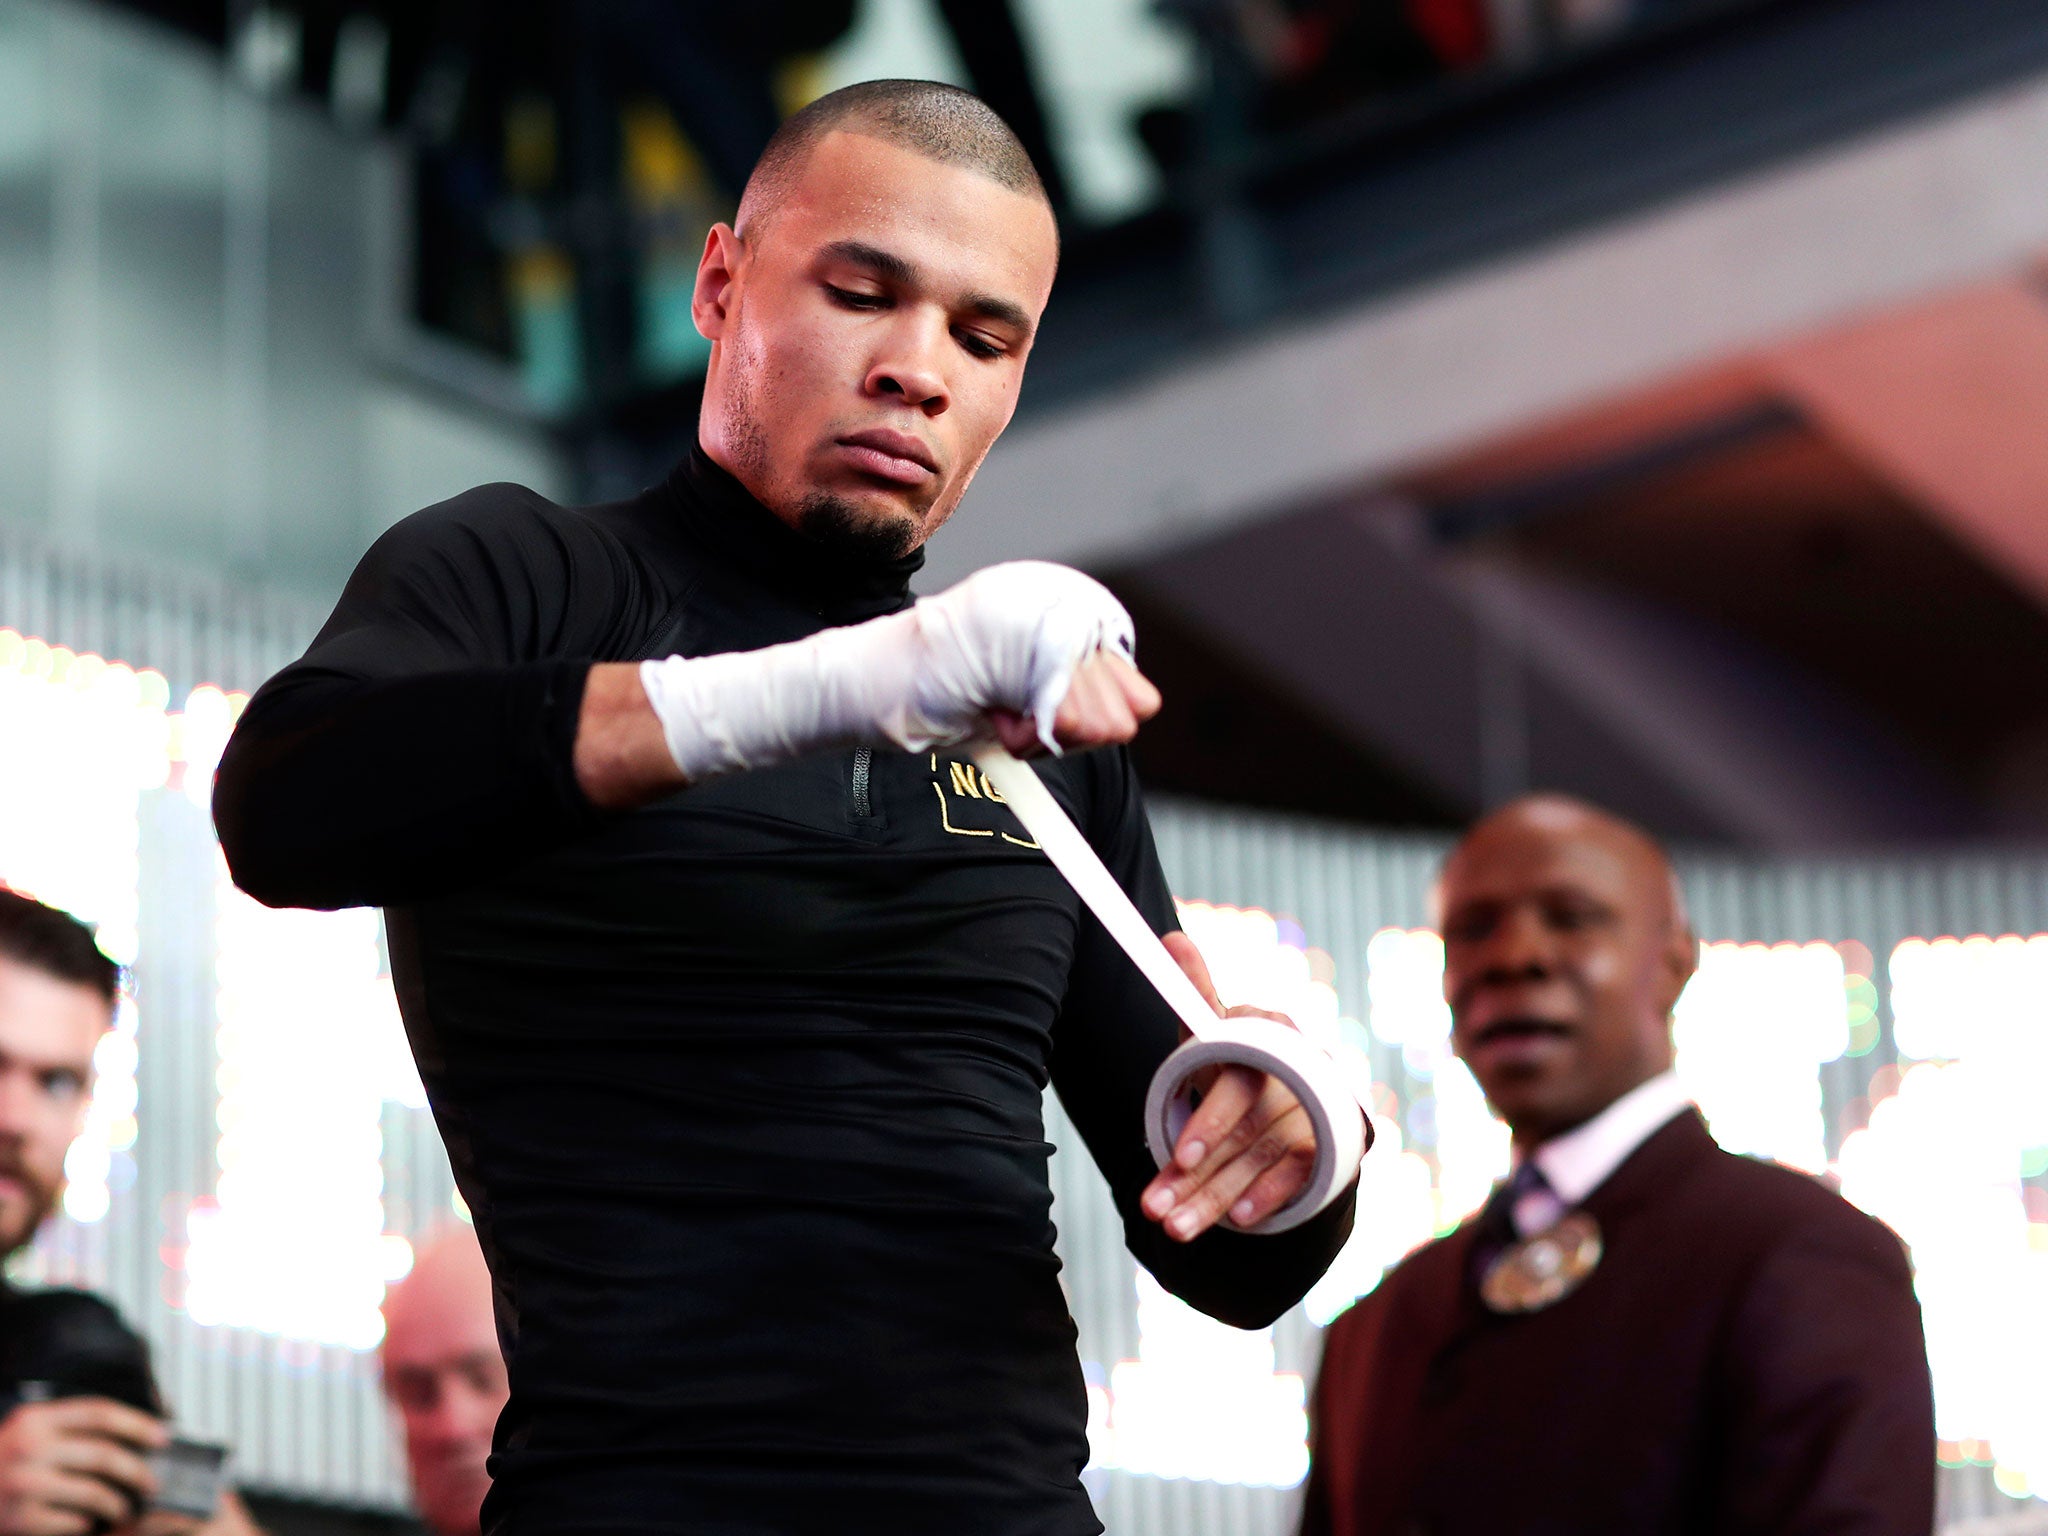 Chris Eubank Jr and George Groves go head to head in Manchester on Saturday evening